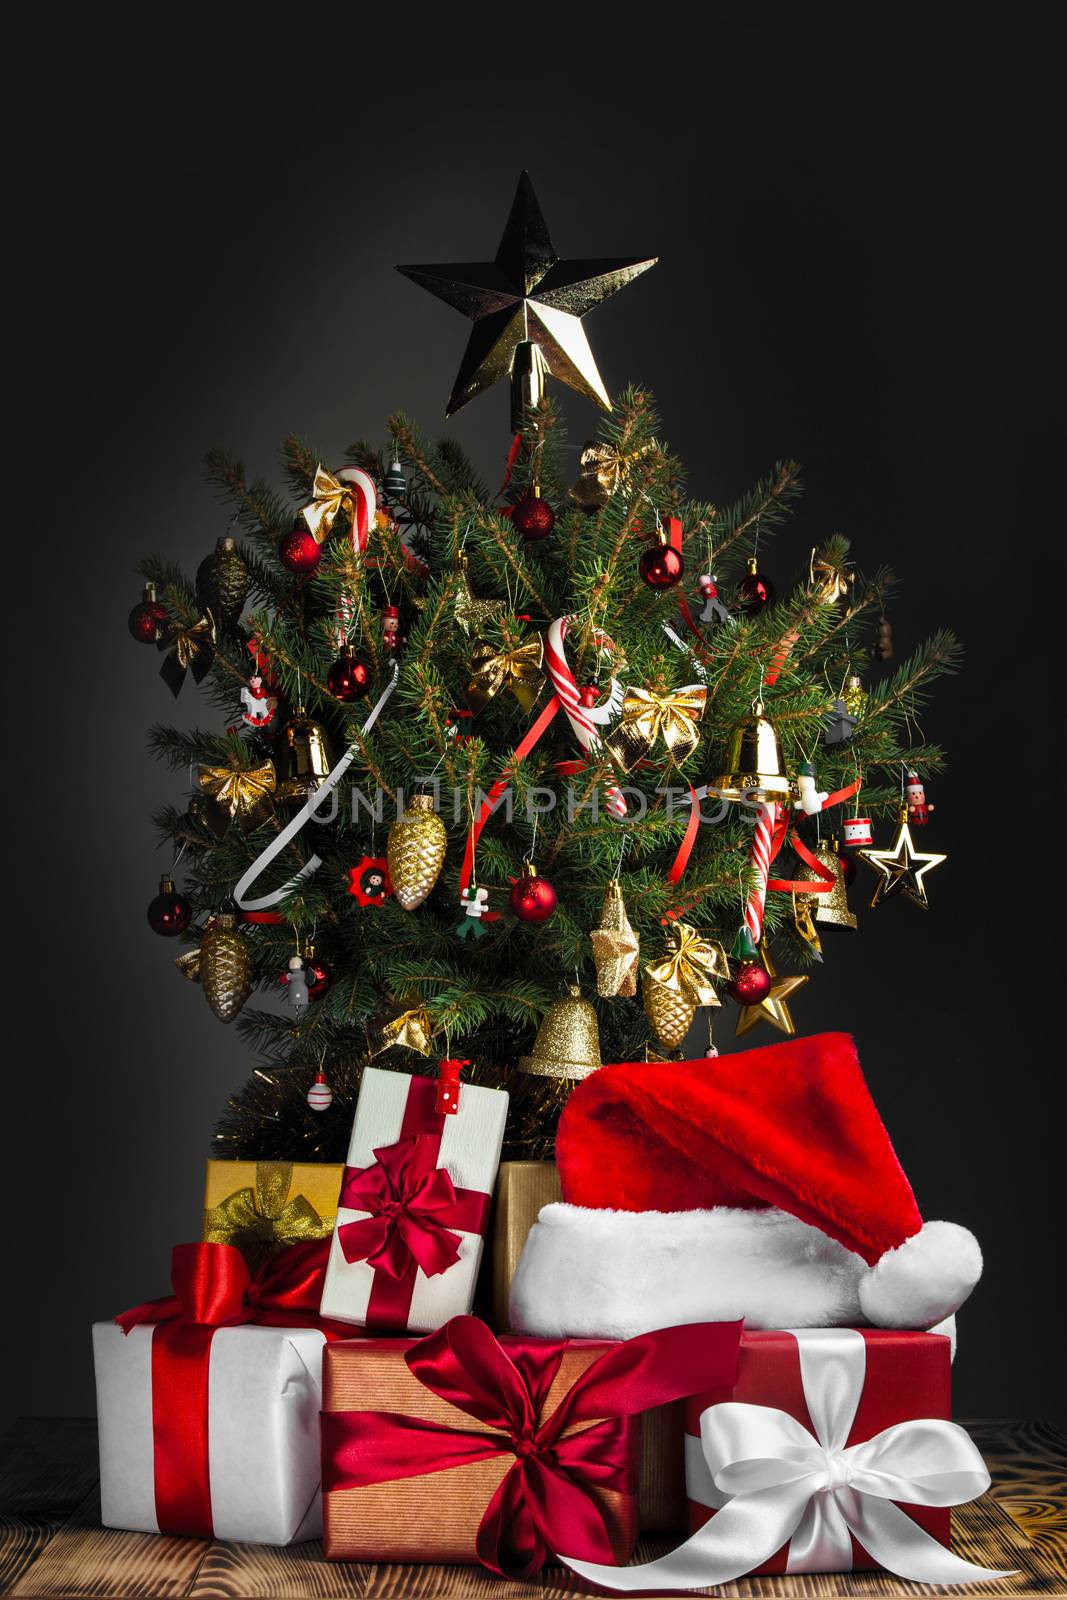 Decorated Christmas tree with glowing lights and gift boxes on dark background